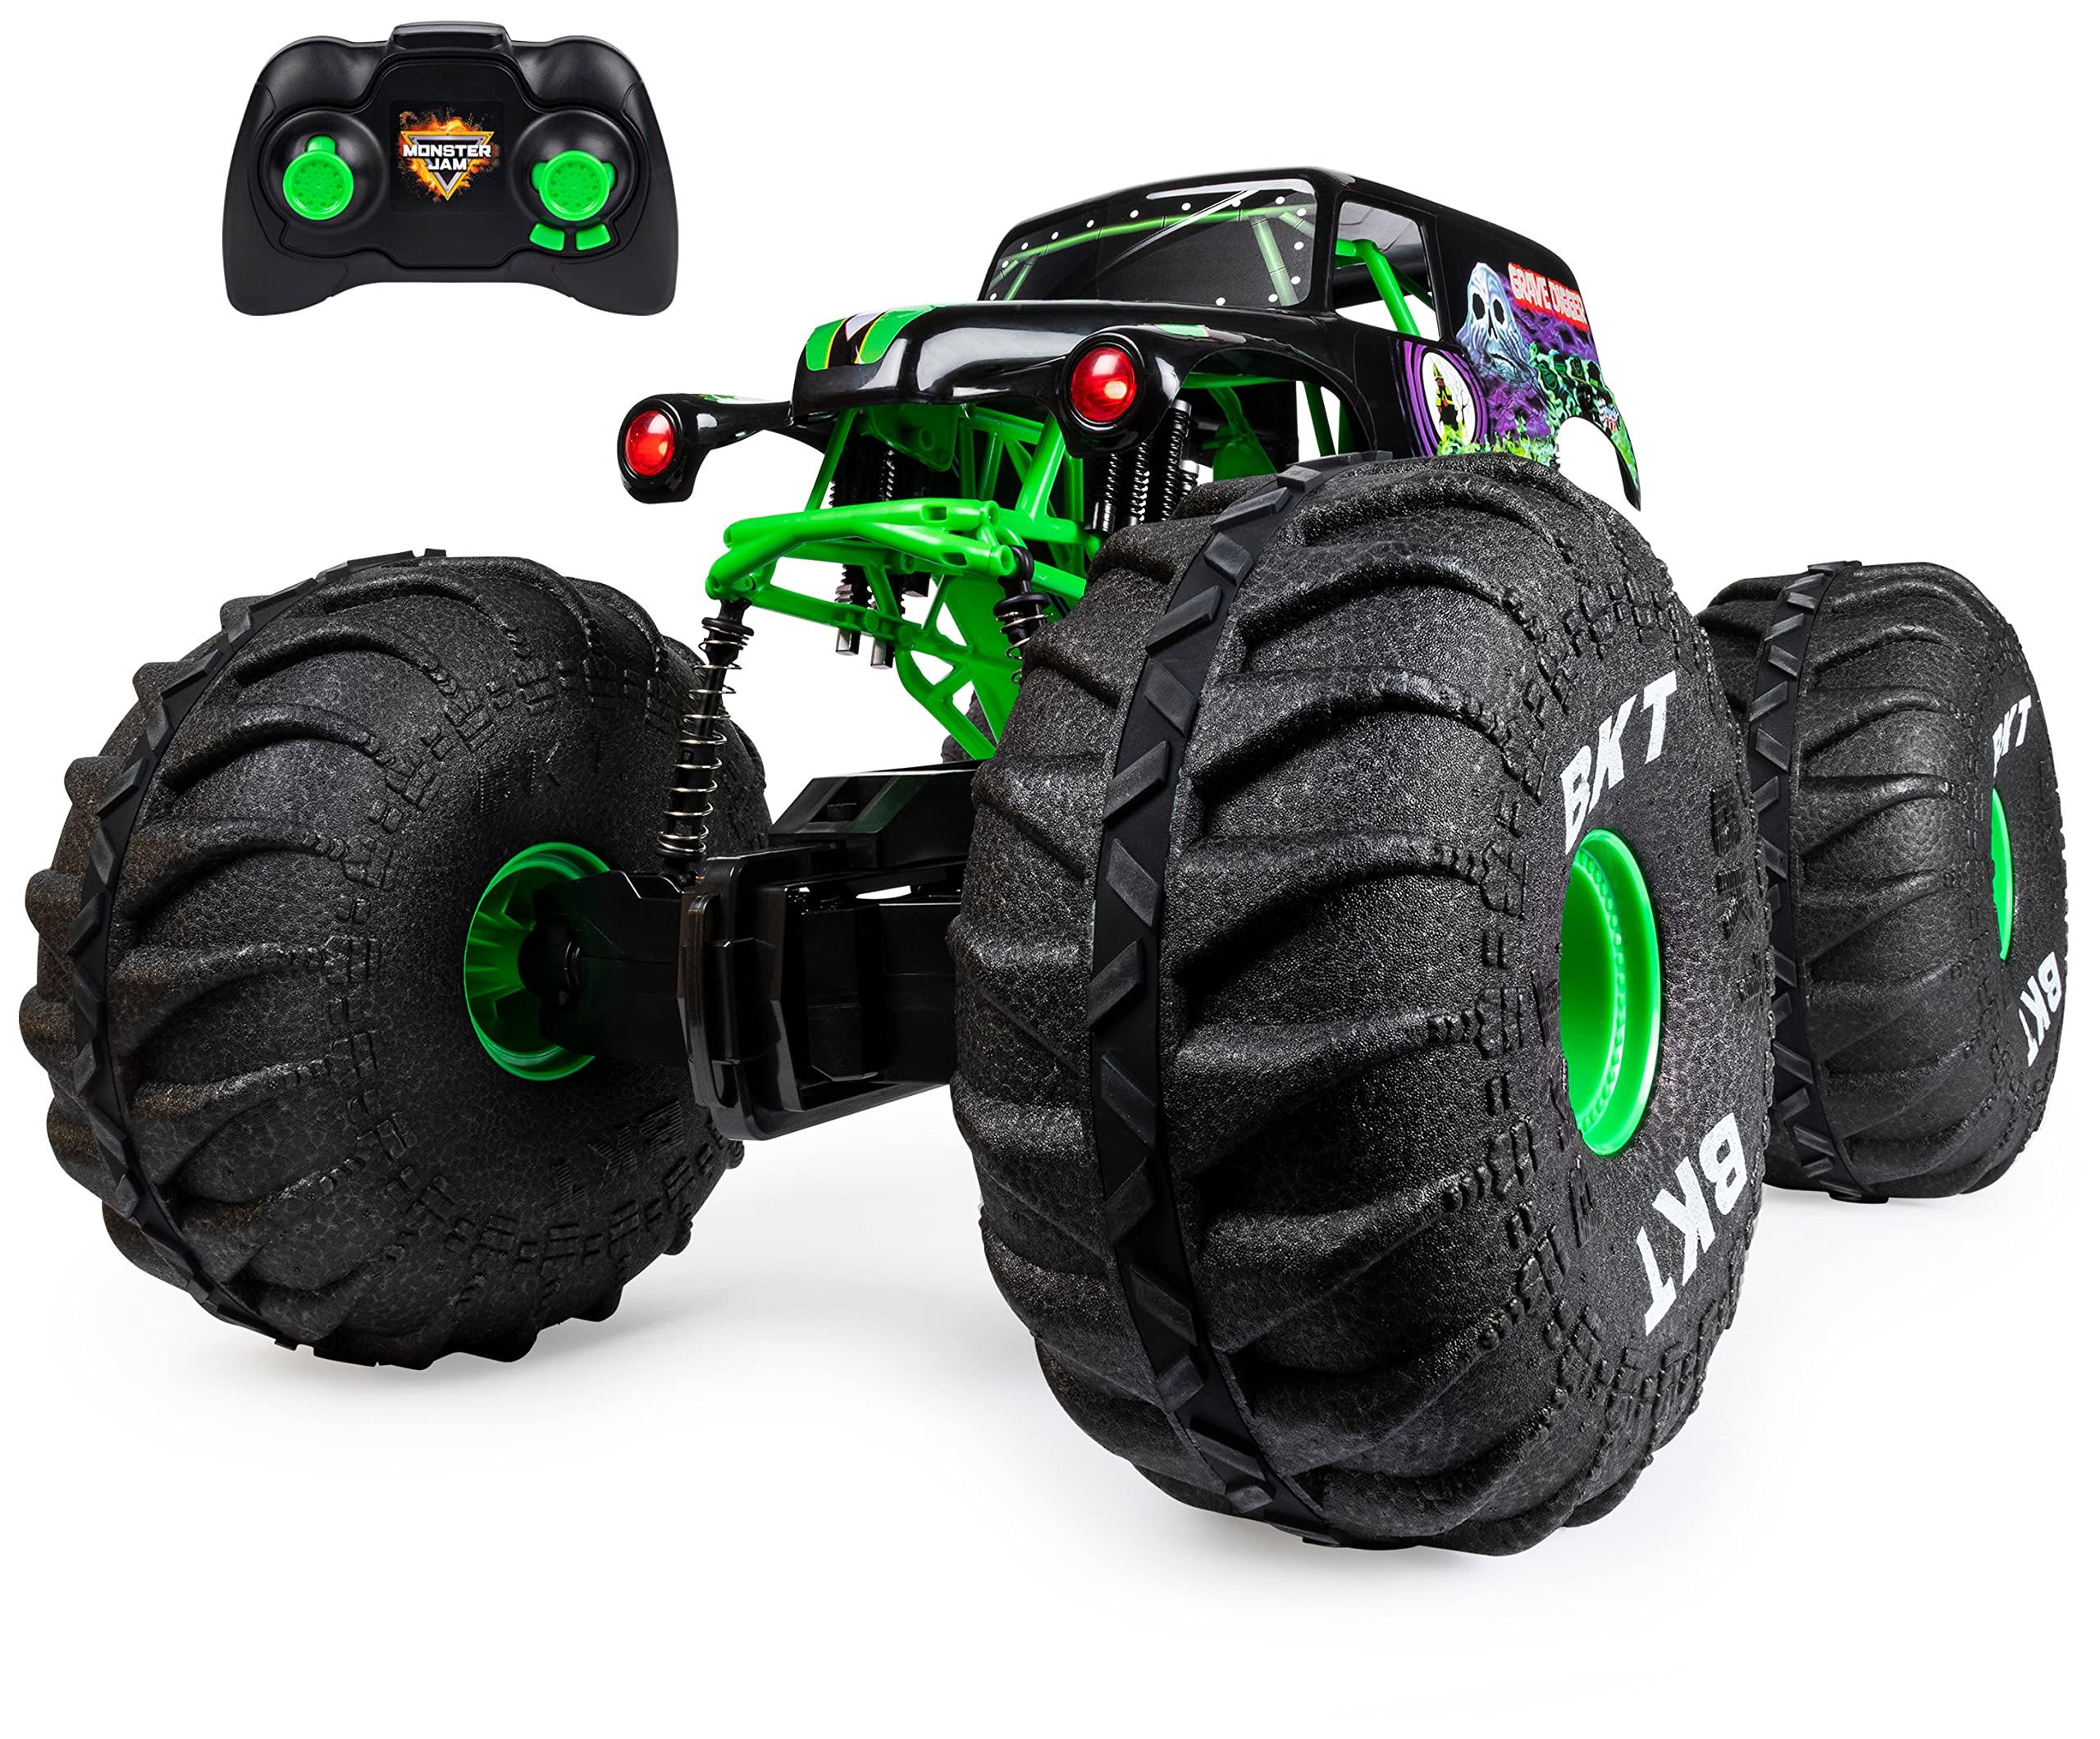 Remote Control Monster Trucks: Factors to Consider When Choosing a Remote Control Monster Truck